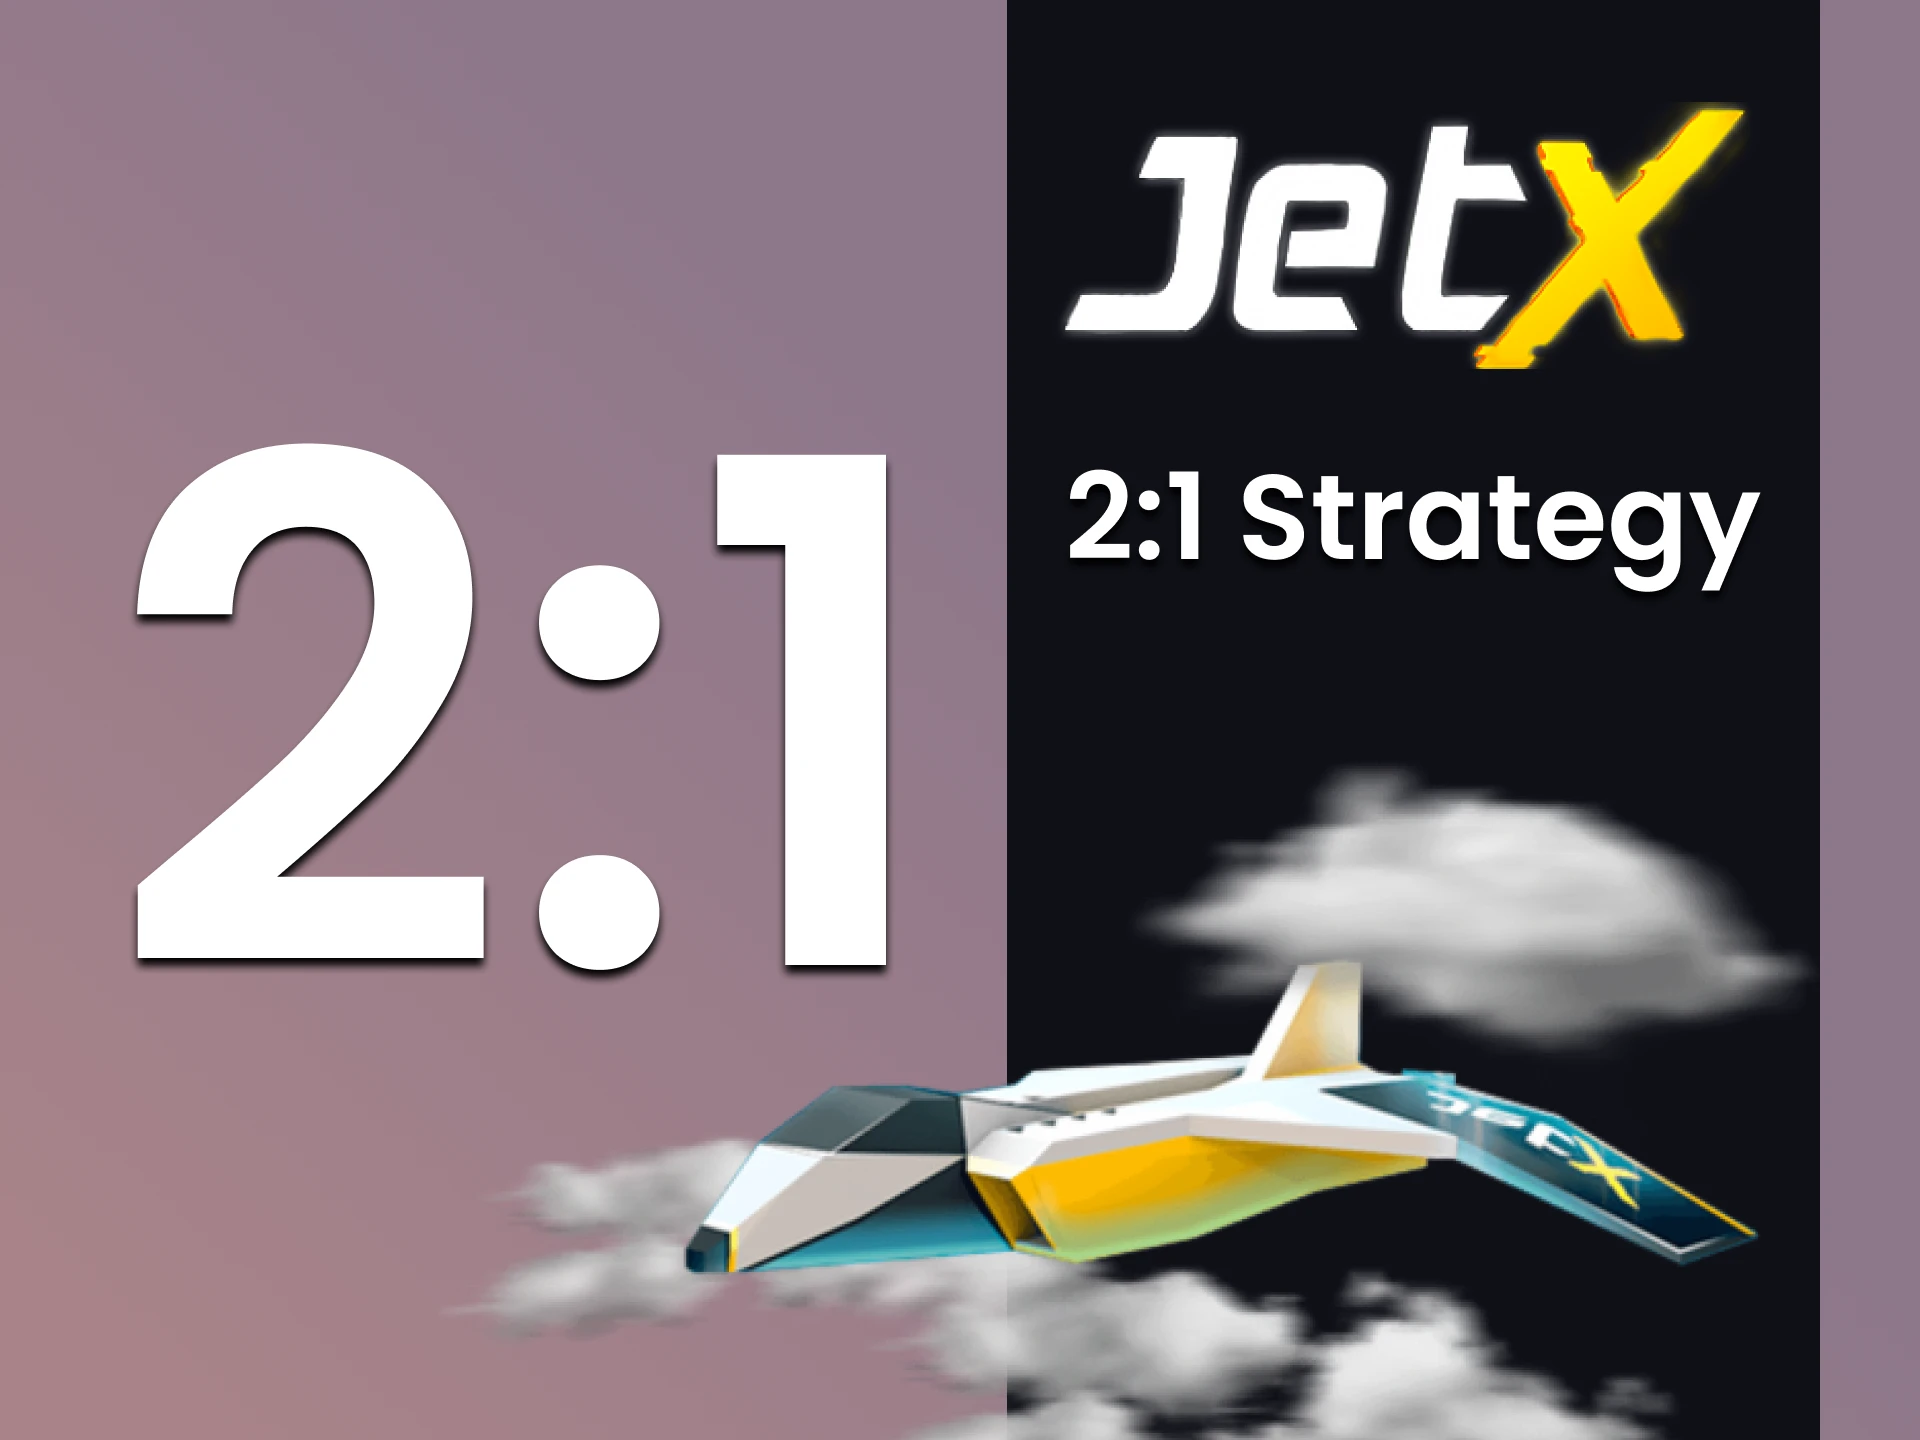 Learn strategy 2:1 for playing JetX.